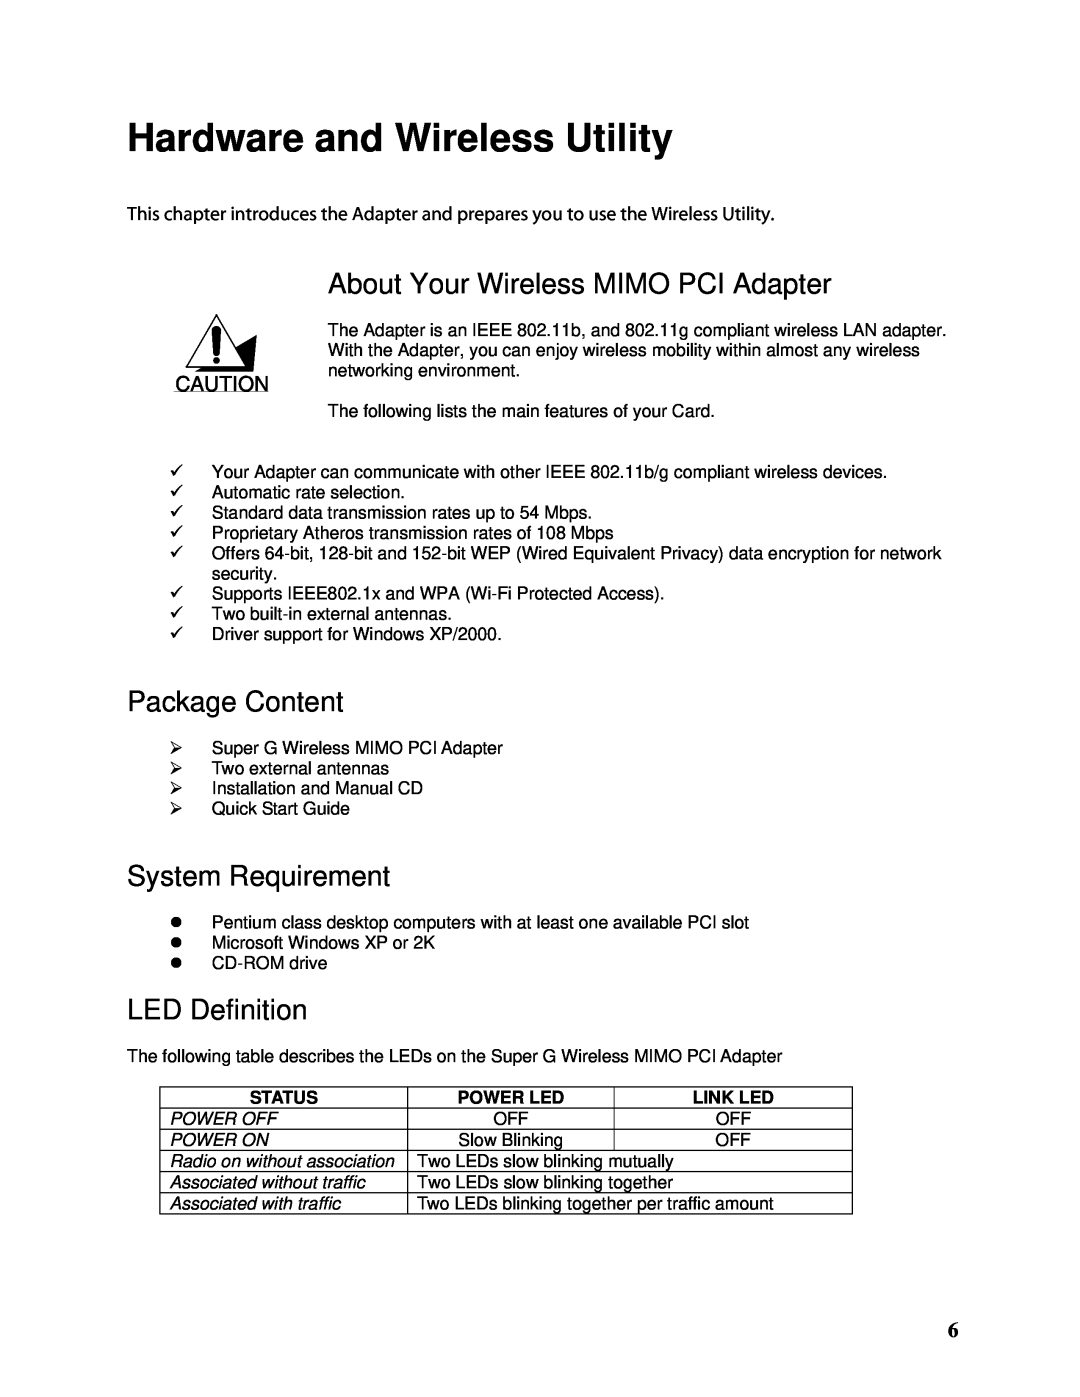 TRENDnet TEW-603PI Hardware and Wireless Utility, About Your Wireless MIMO PCI Adapter, Package Content, LED Definition 